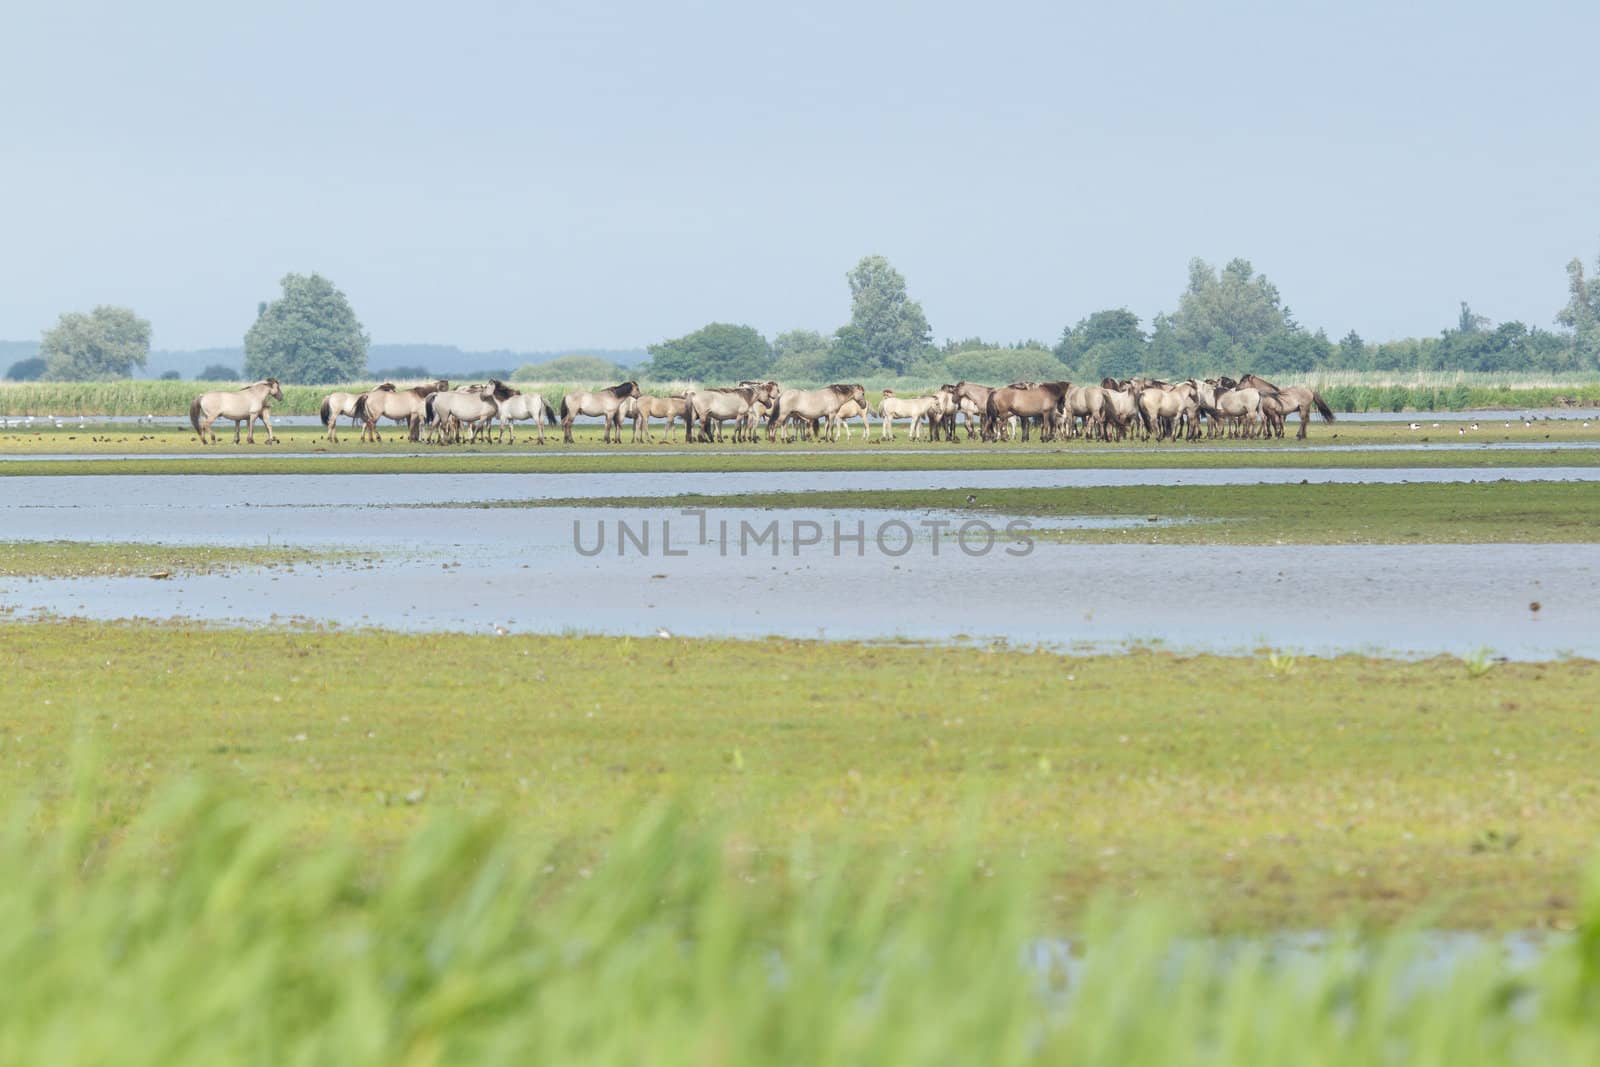 A group of Konik horses by michaklootwijk